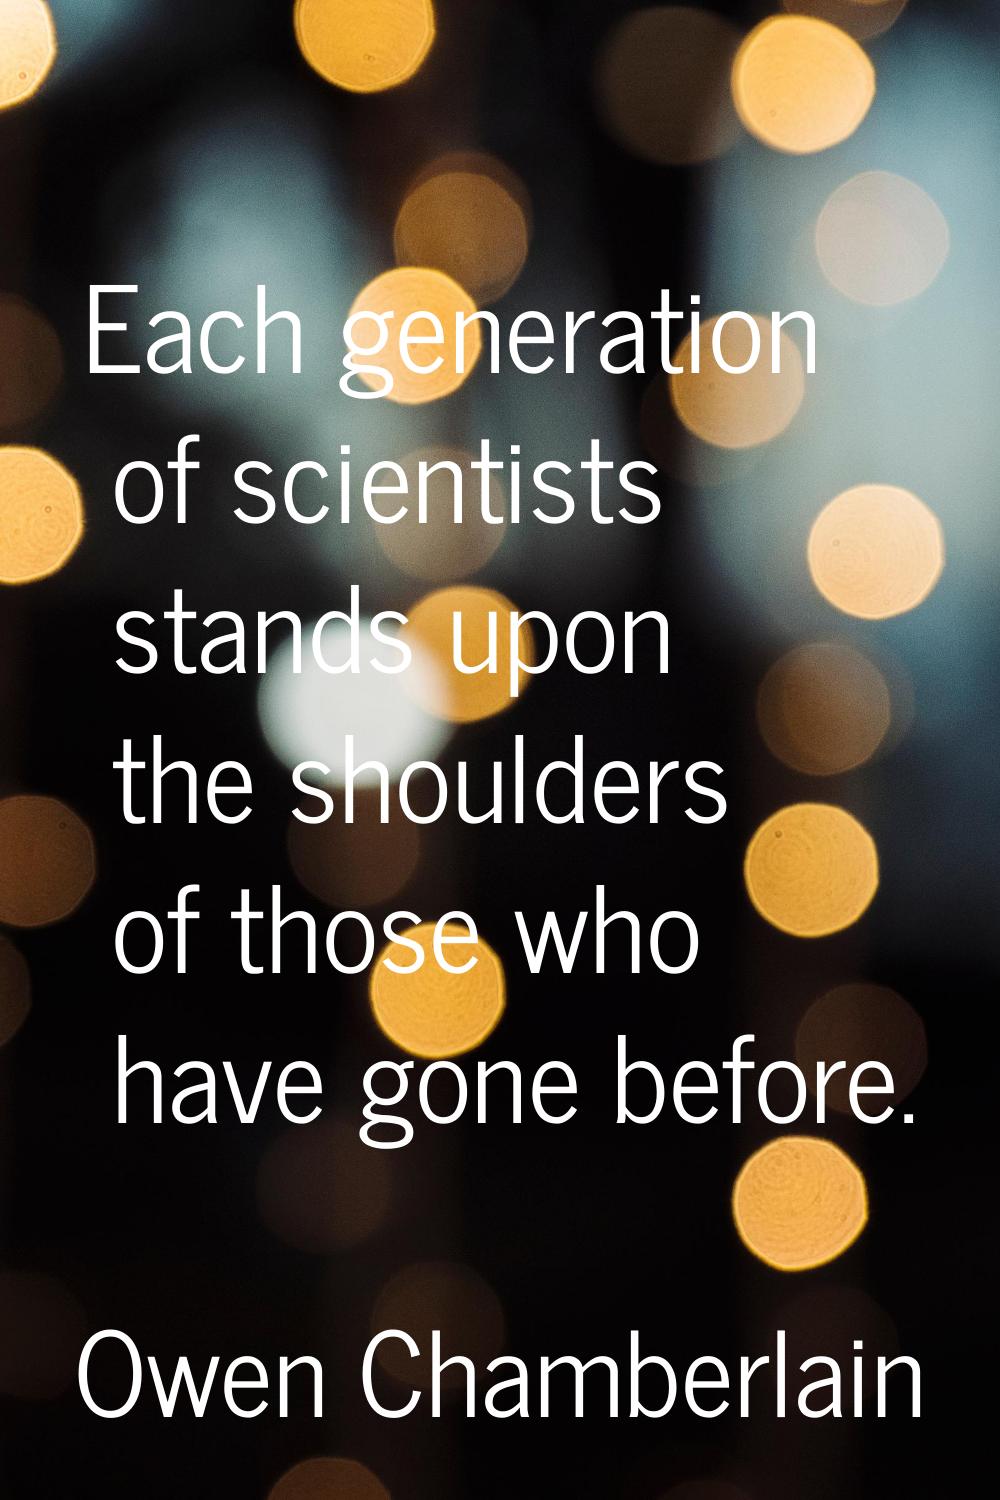 Each generation of scientists stands upon the shoulders of those who have gone before.